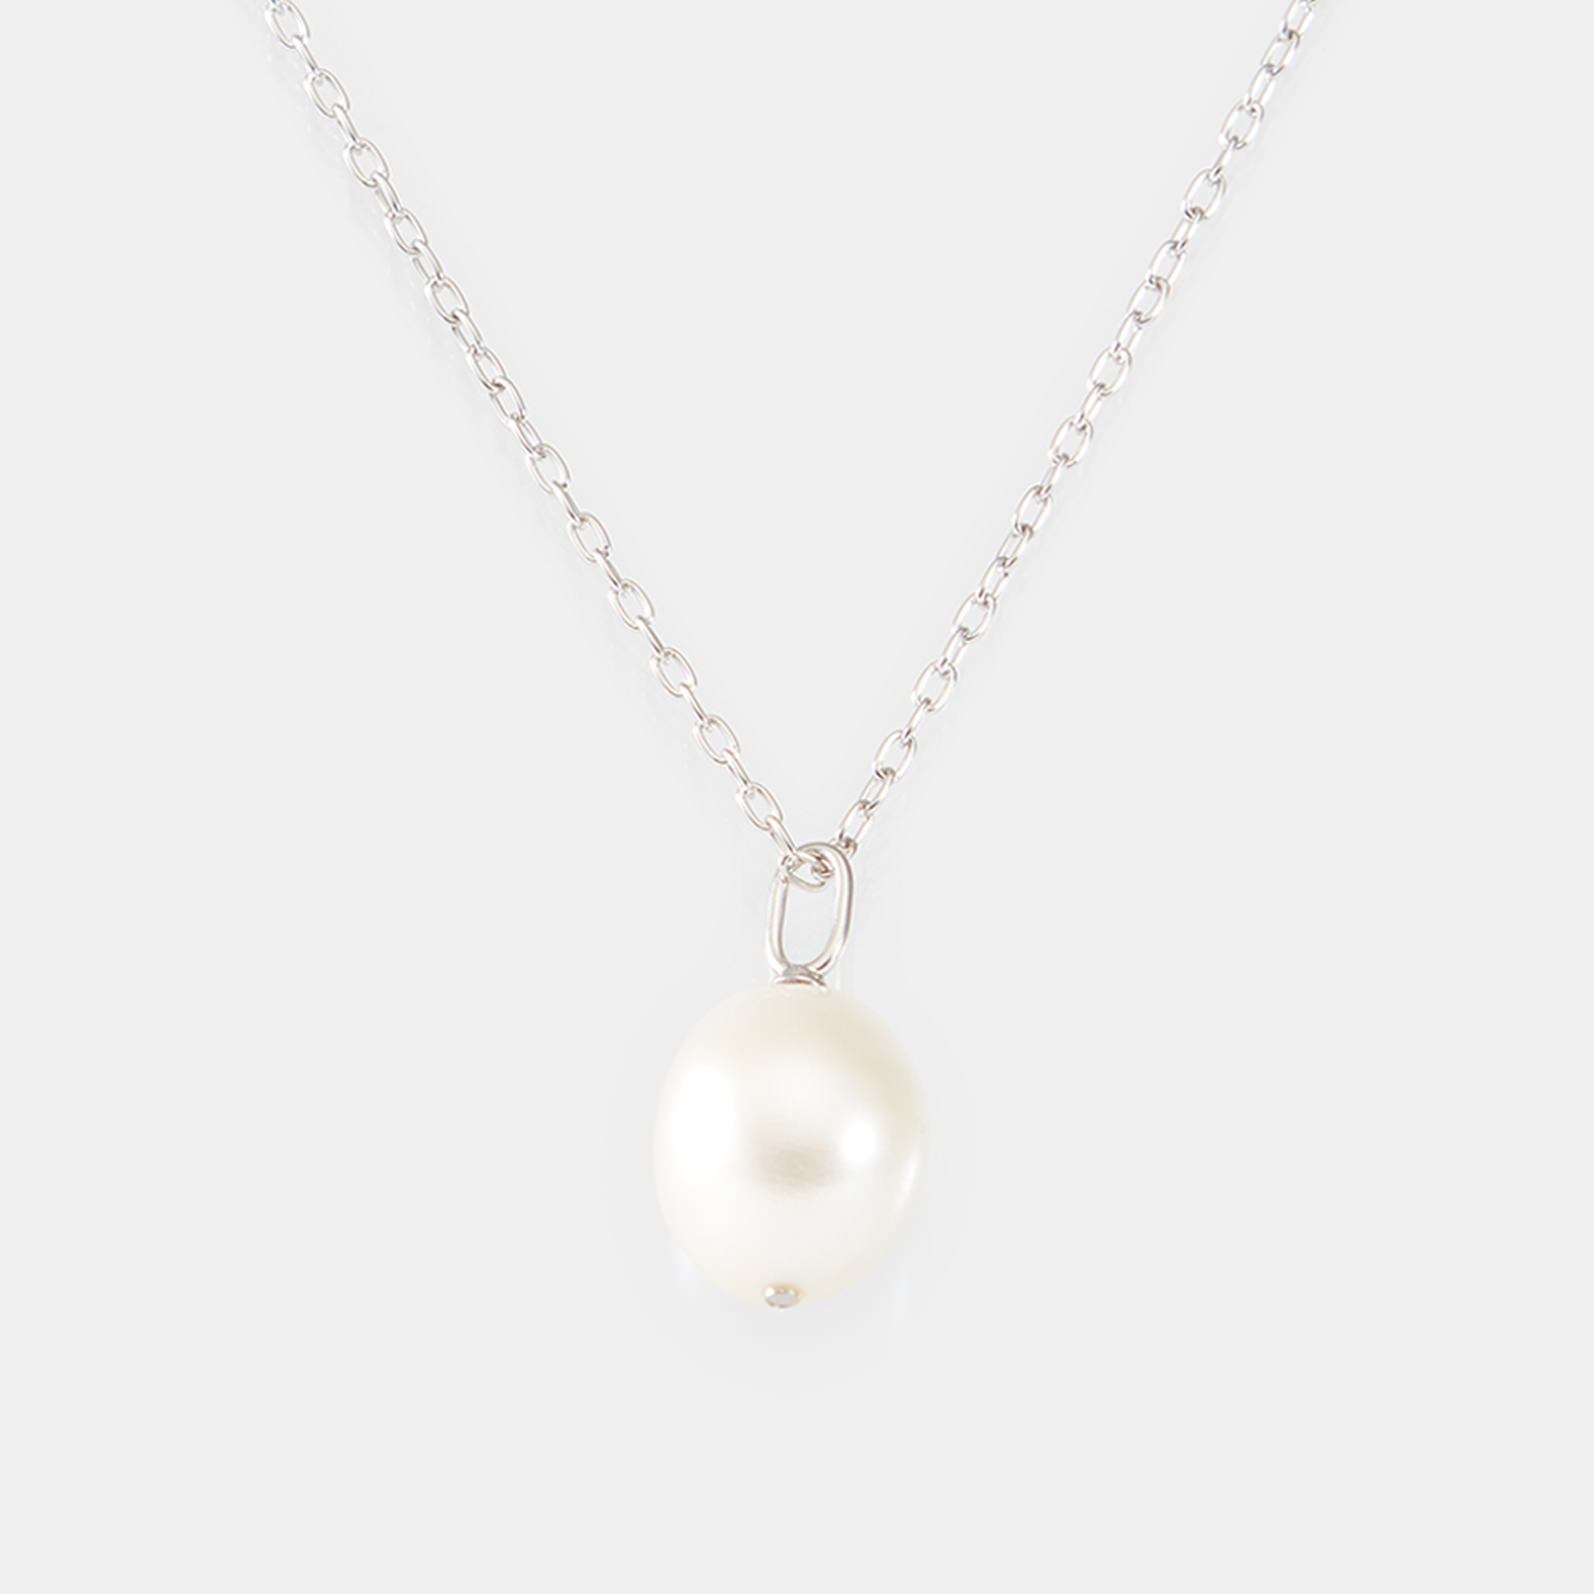 10 Pearl Pendants That Are Too Perfect to Pass Up - FabFitFun